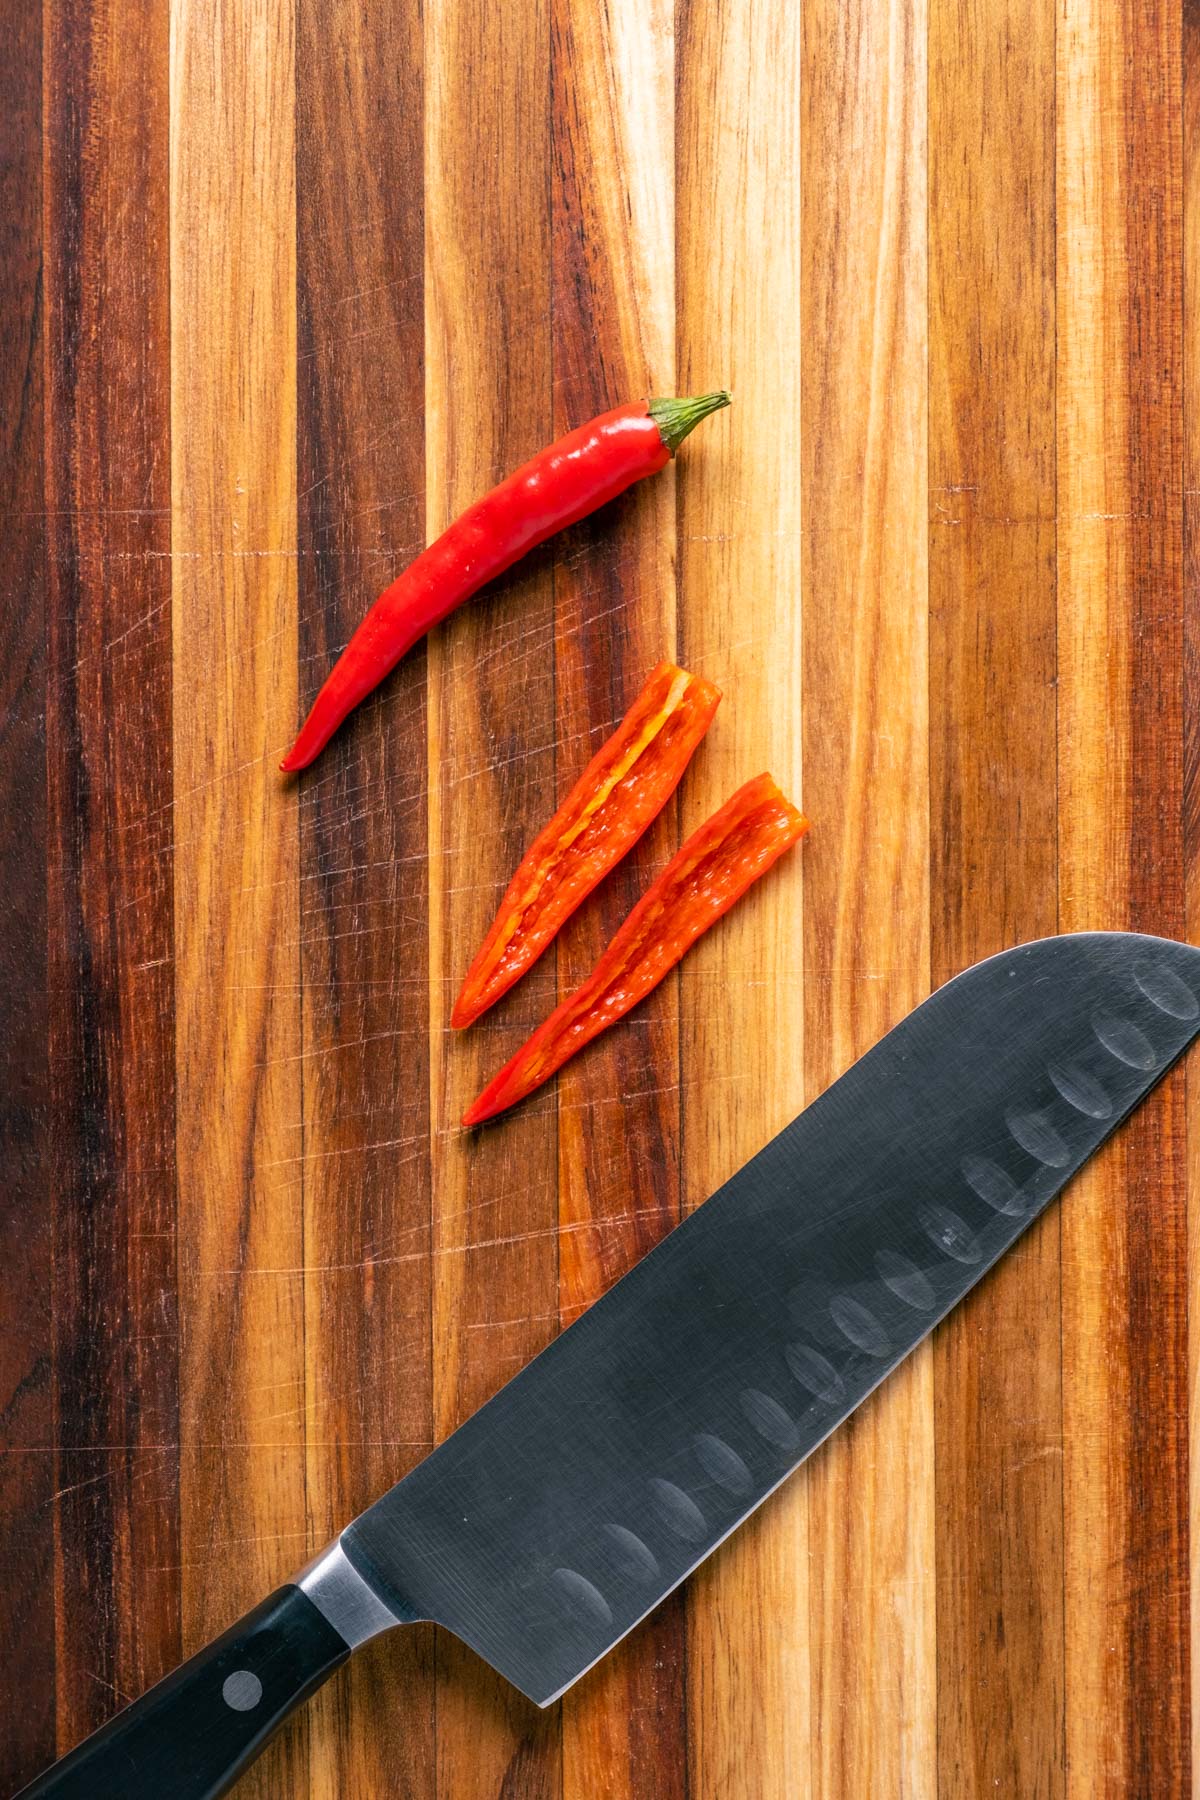 Slicing chili on a wooden cutting board.